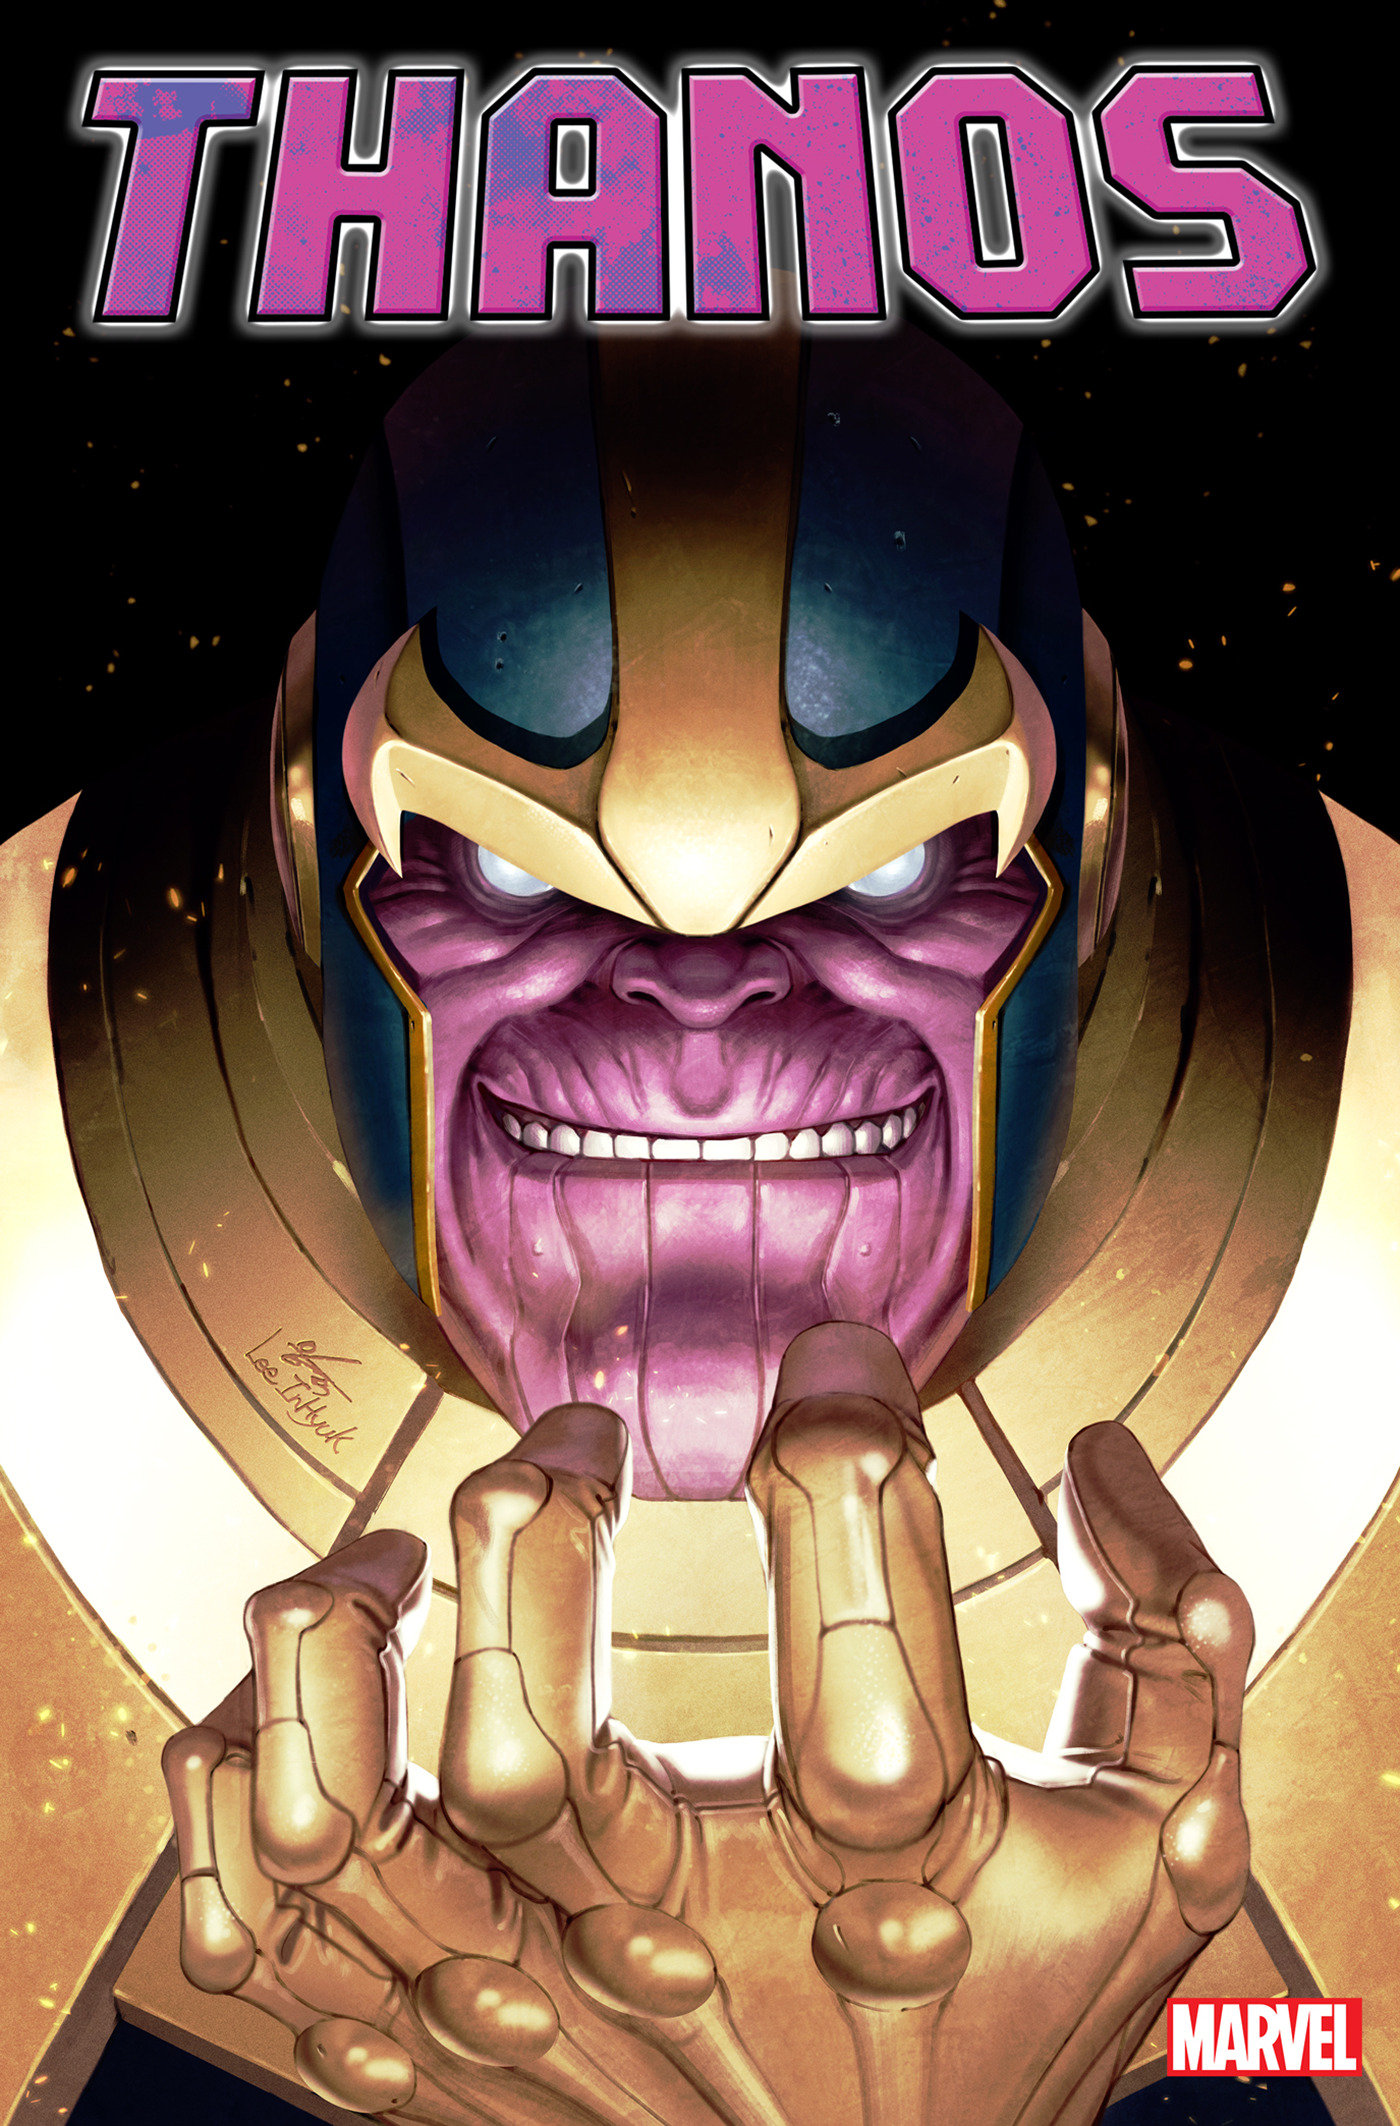 Thanos #1 Inhyuk Lee Variant 1 for 25 Incentive